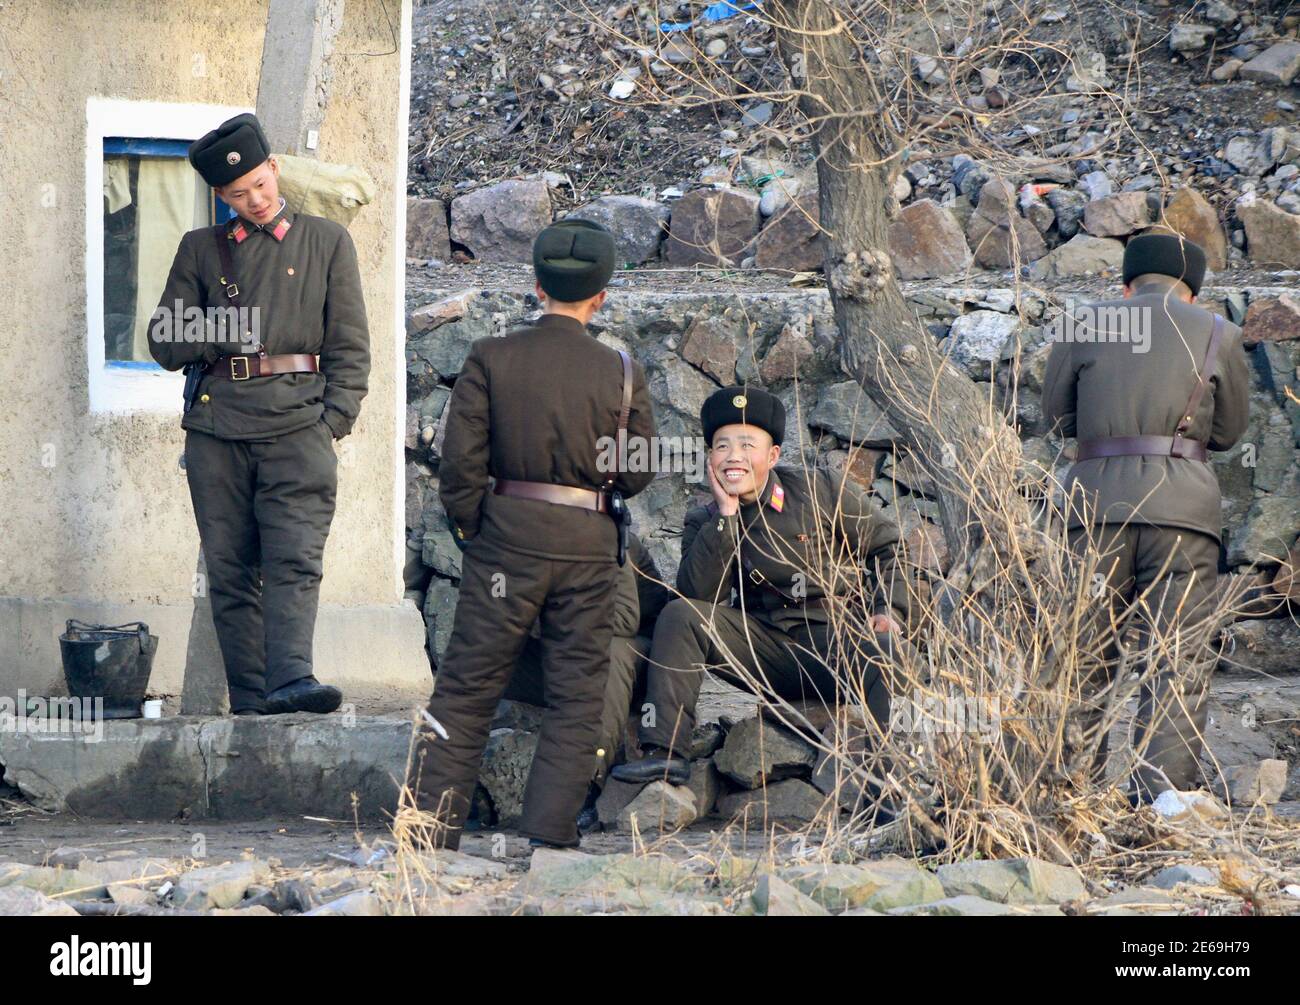 North Korean soldiers talk on the banks of the Yalu River, near the North Korean town of Sinuiju, opposite the Chinese border city of Dandong, November 23, 2010. China expressed worry about reports that North Korea had shelled a South Korean island on  Tuesday in the latest escalation of tensions on the Korean peninsula that neigbours the world's second-biggest economy.  . REUTERS/Stringer (NORTH KOREA - Tags: POLITICS ENERGY MILITARY IMAGES OF THE DAY) Stock Photo